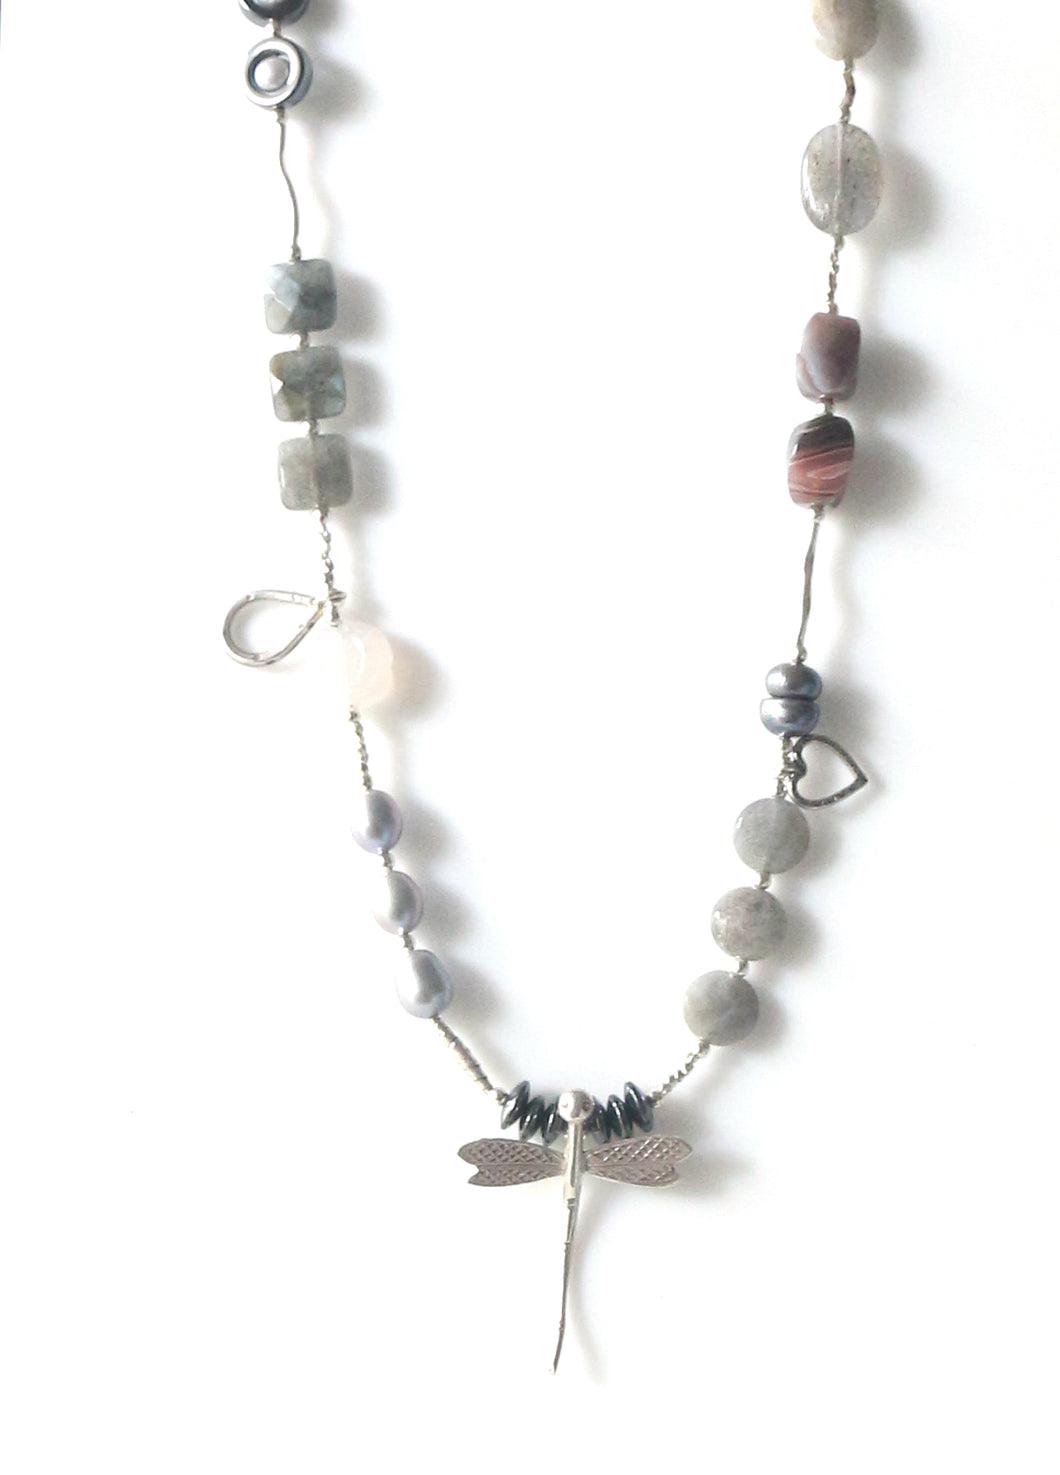 Australian Handmade Grey Necklace with Labradorite Agate Pearls Hematite and Sterling Silver